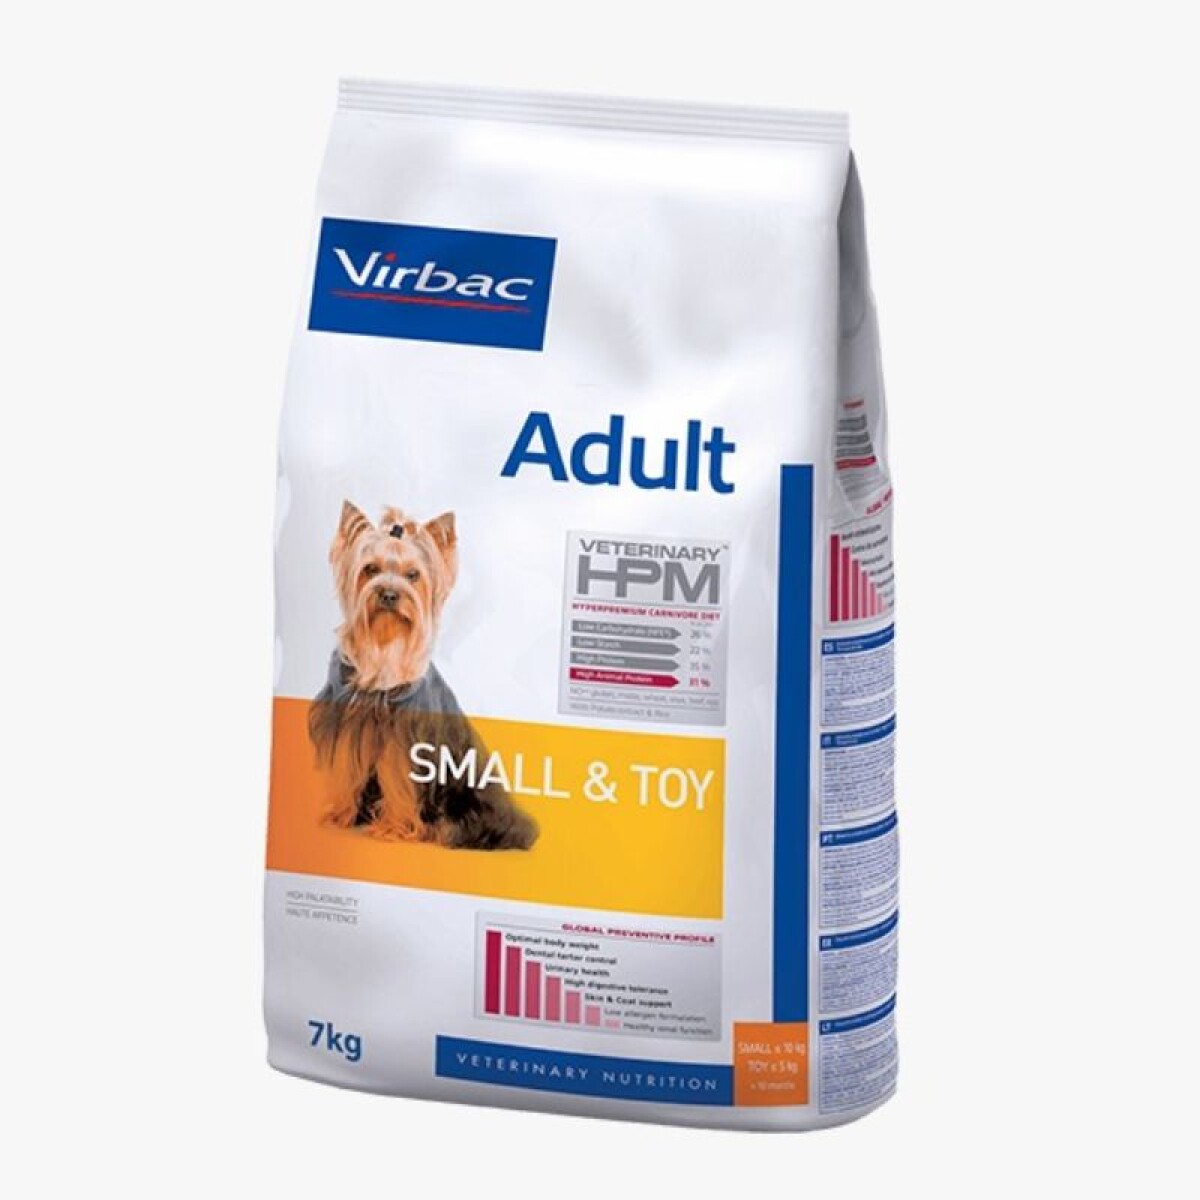 HPM ADULT DOG SMALL & TOY 7 KG - Hpm Adult Dog Small & Toy 7 Kg 